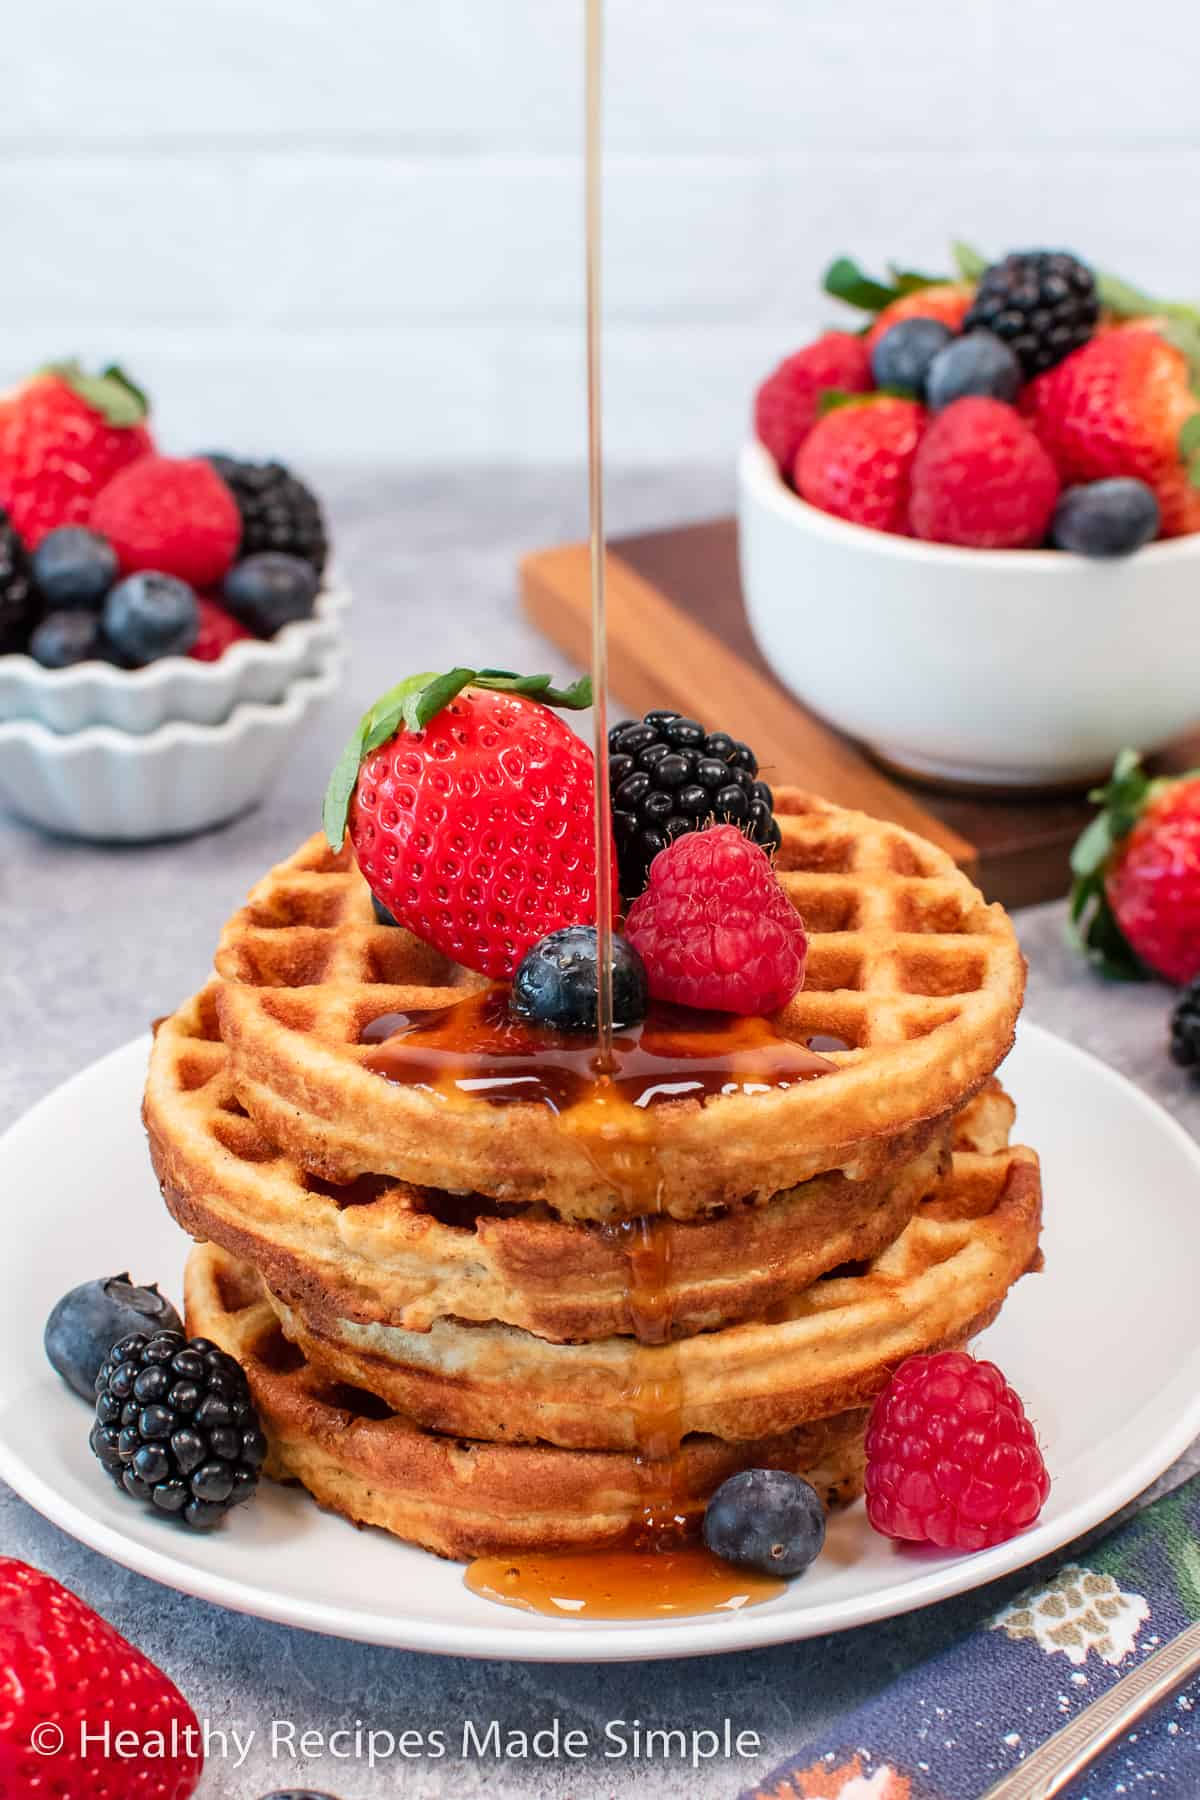 A stack of four waffles on a plate with fresh fruit on top and a stream of syrup.